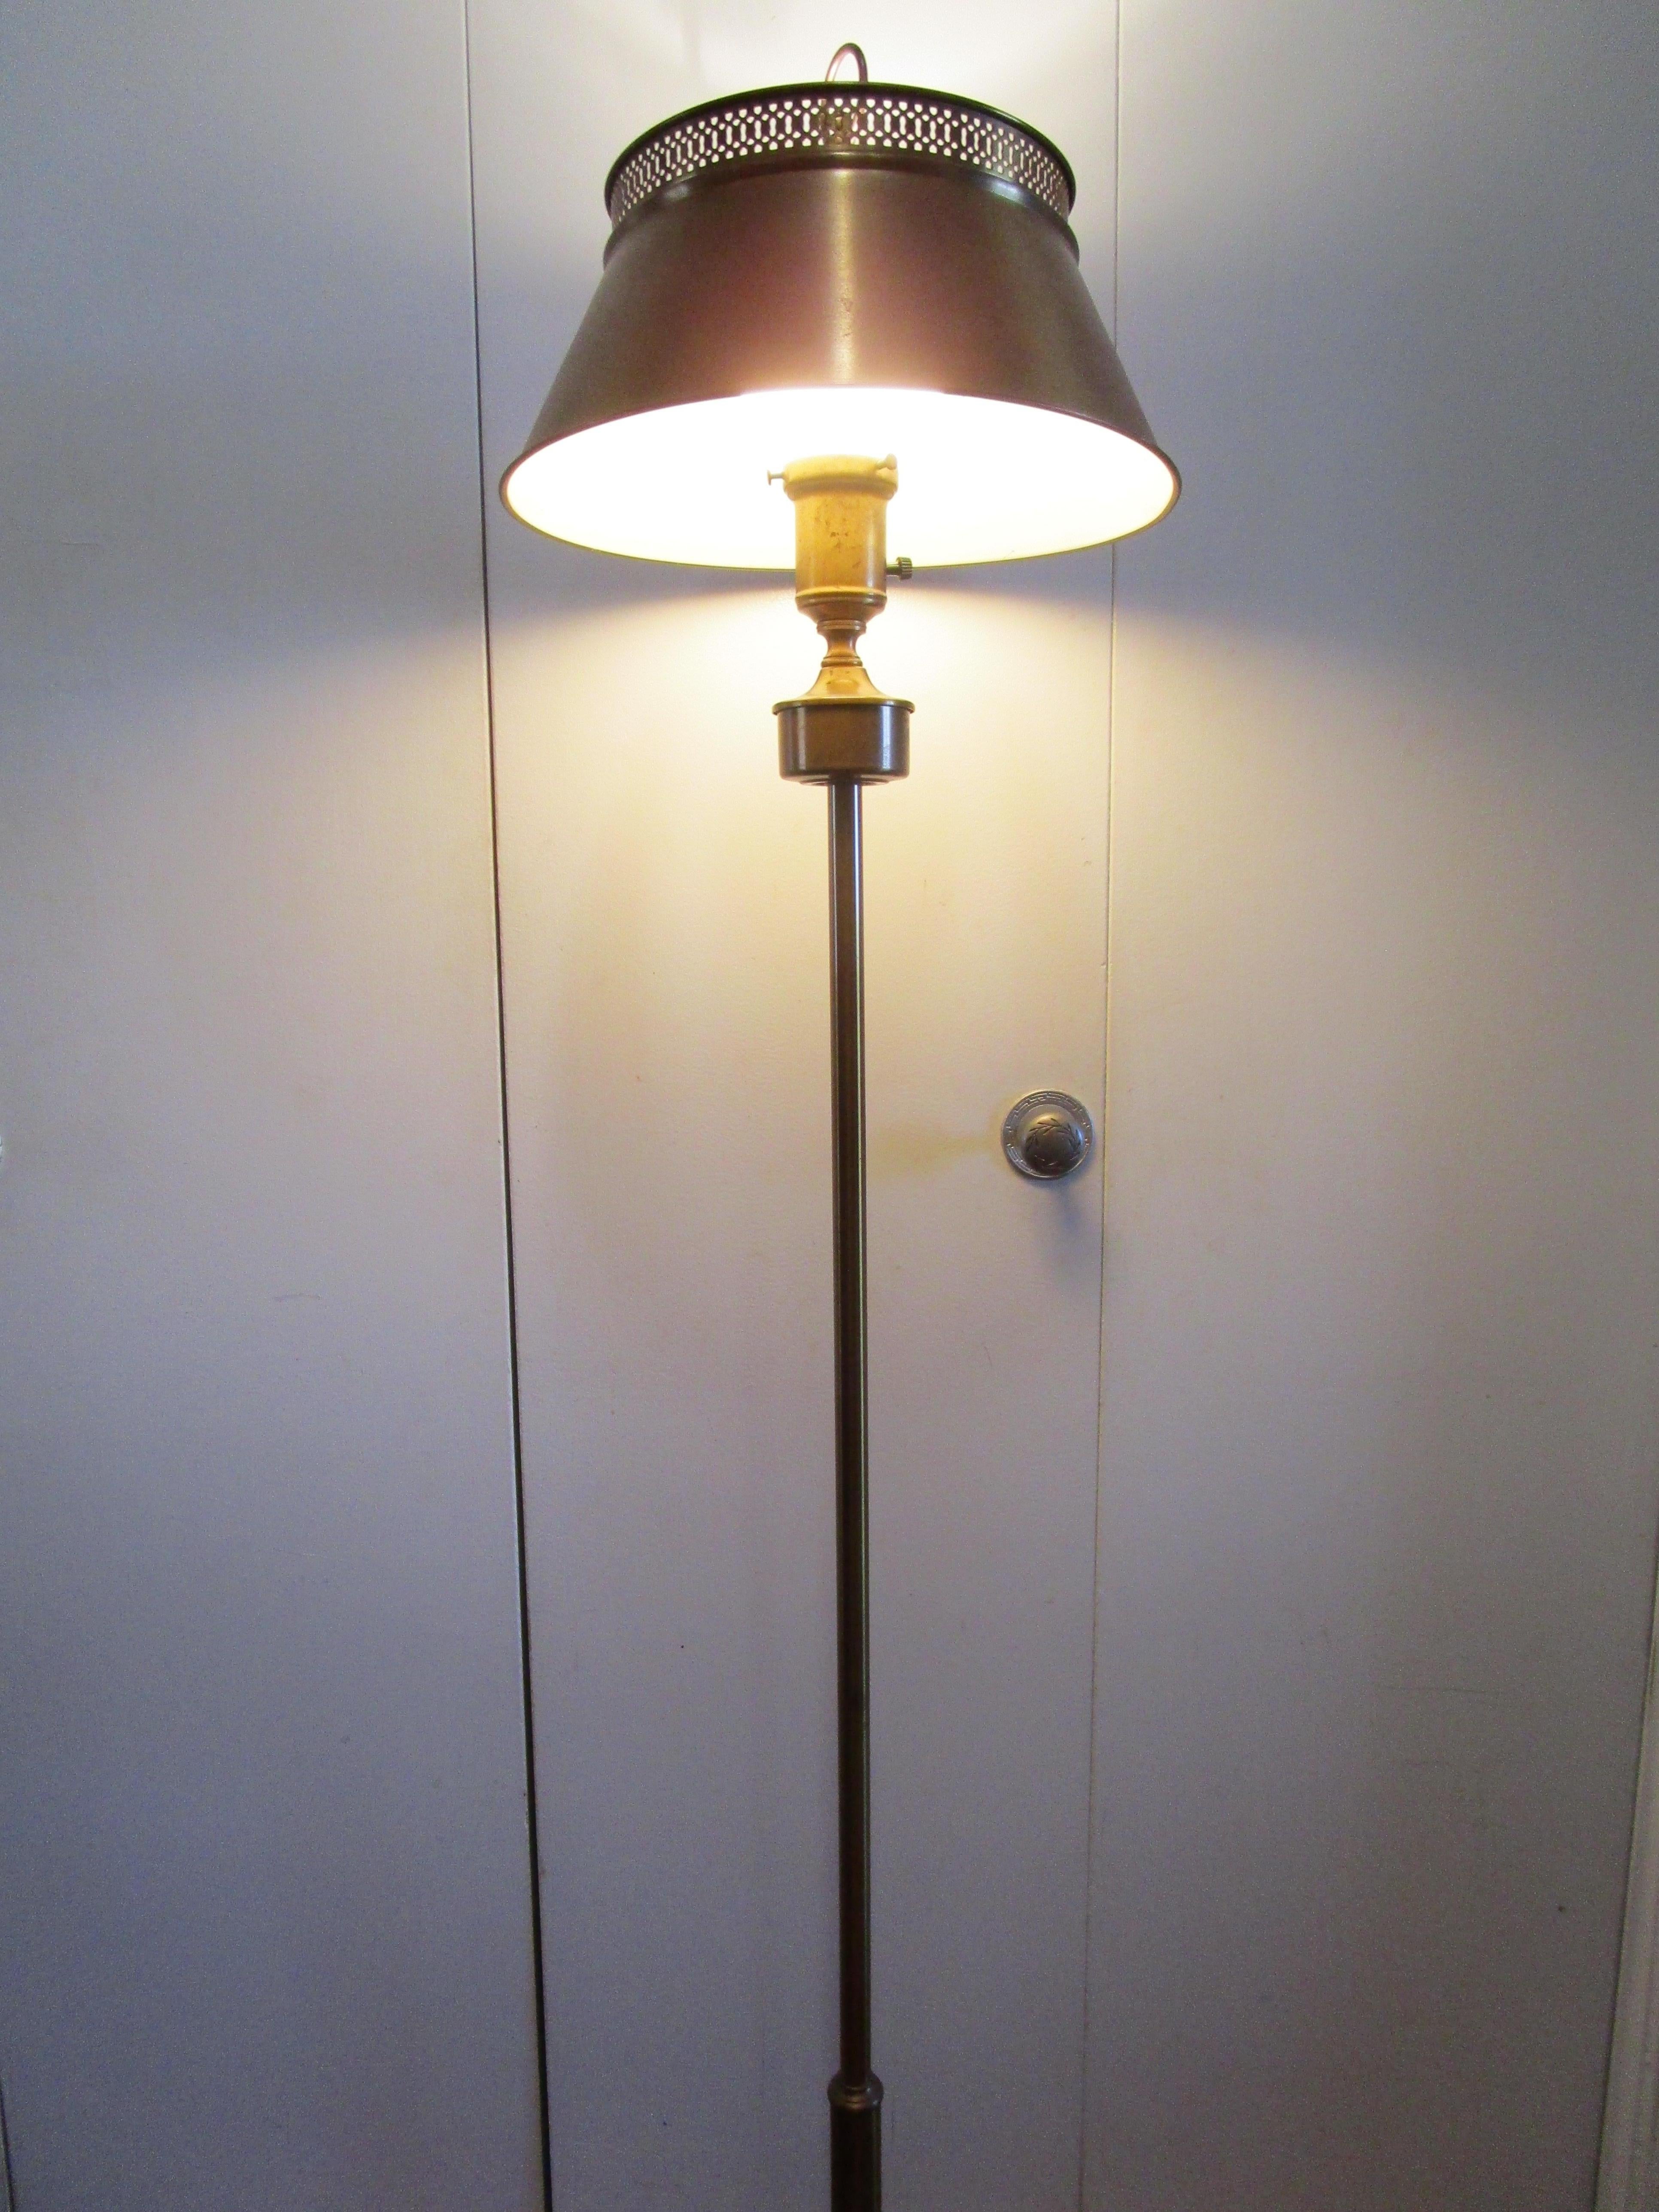 This vintage tole lamp is true to form with extras, like the original glass shade diffuser in perfect condition under the metal top shade. But the  burnished brass or gold tone finish of this floor lamp makes it the star of the show in any hallway